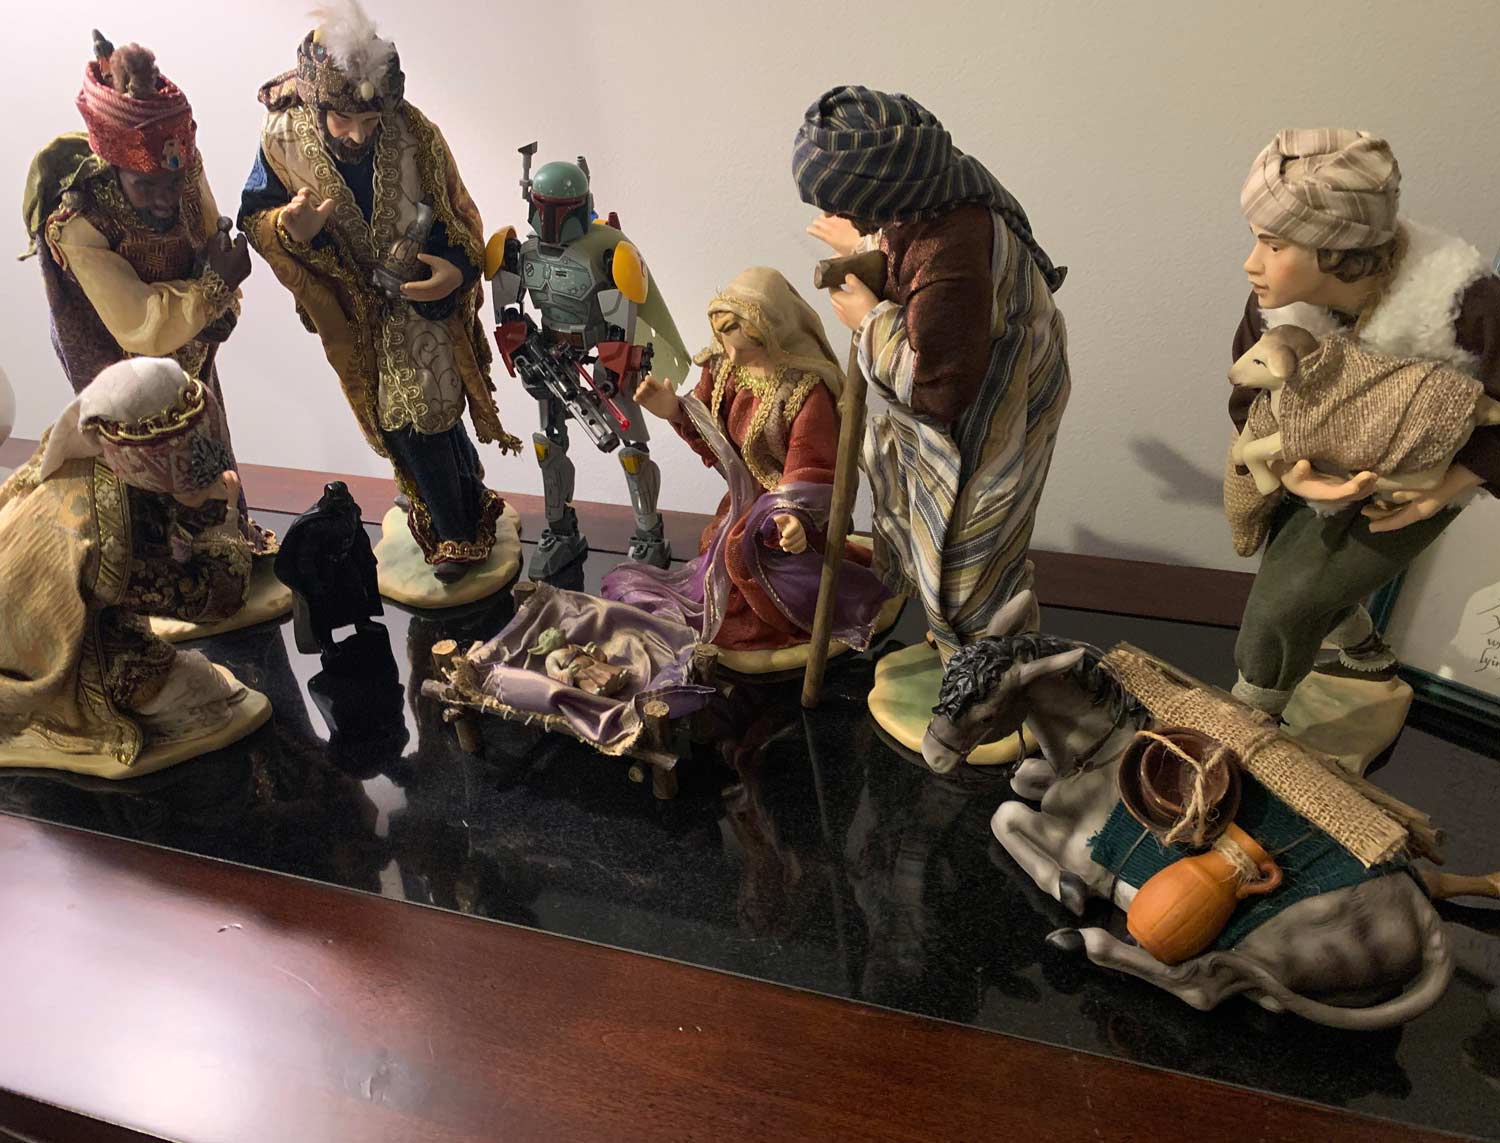 Day 1 of adding stuff to the nativity scene, until my mom notices